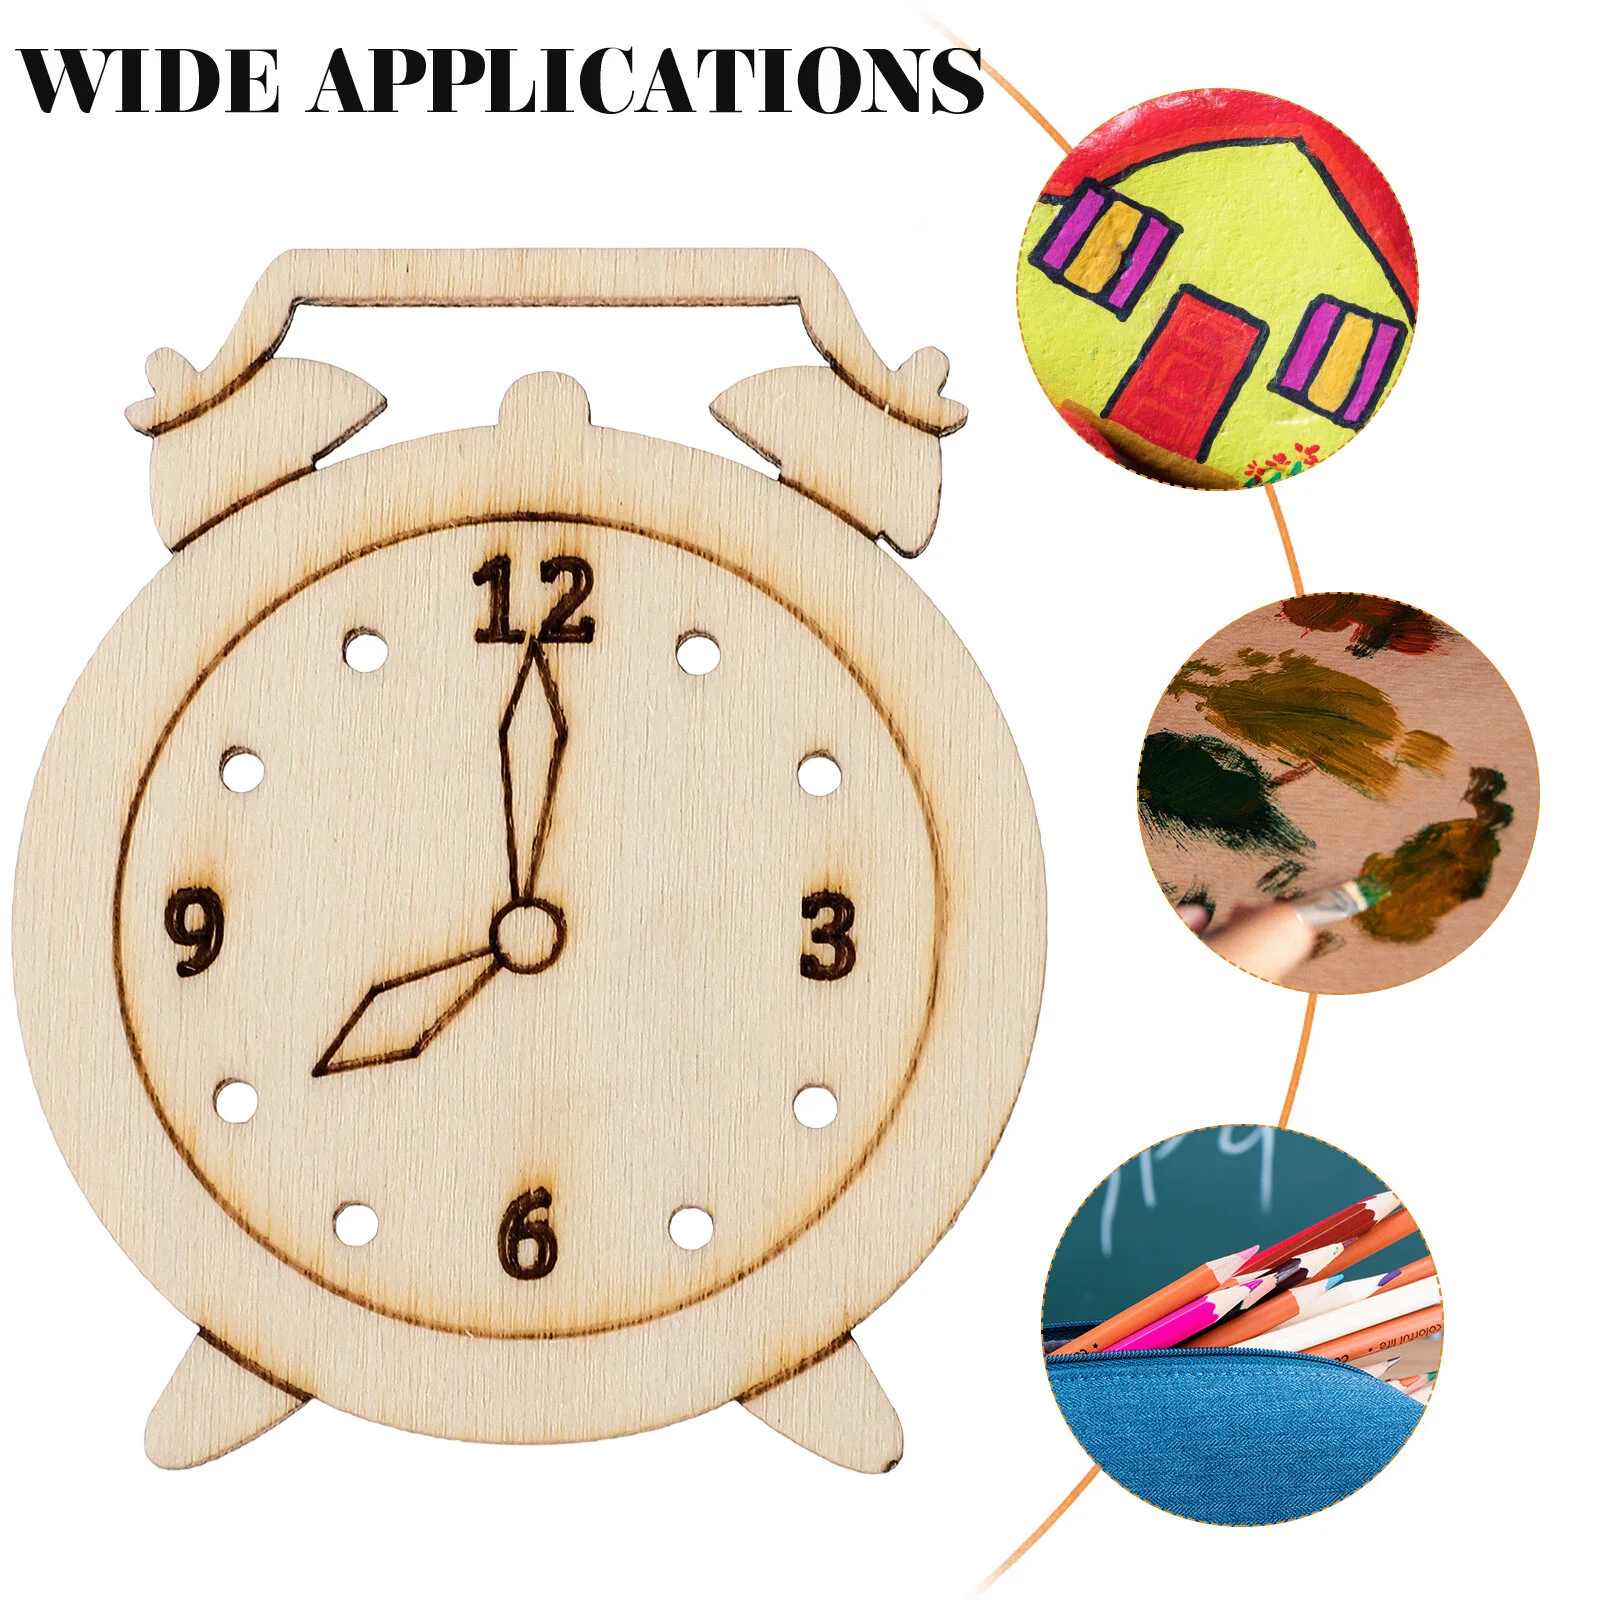 

5 Packs Wooden Cutout DIY Clock Cutouts Playset Slices Craft Decorations Graffiti Chips House Home Painted Embellishments